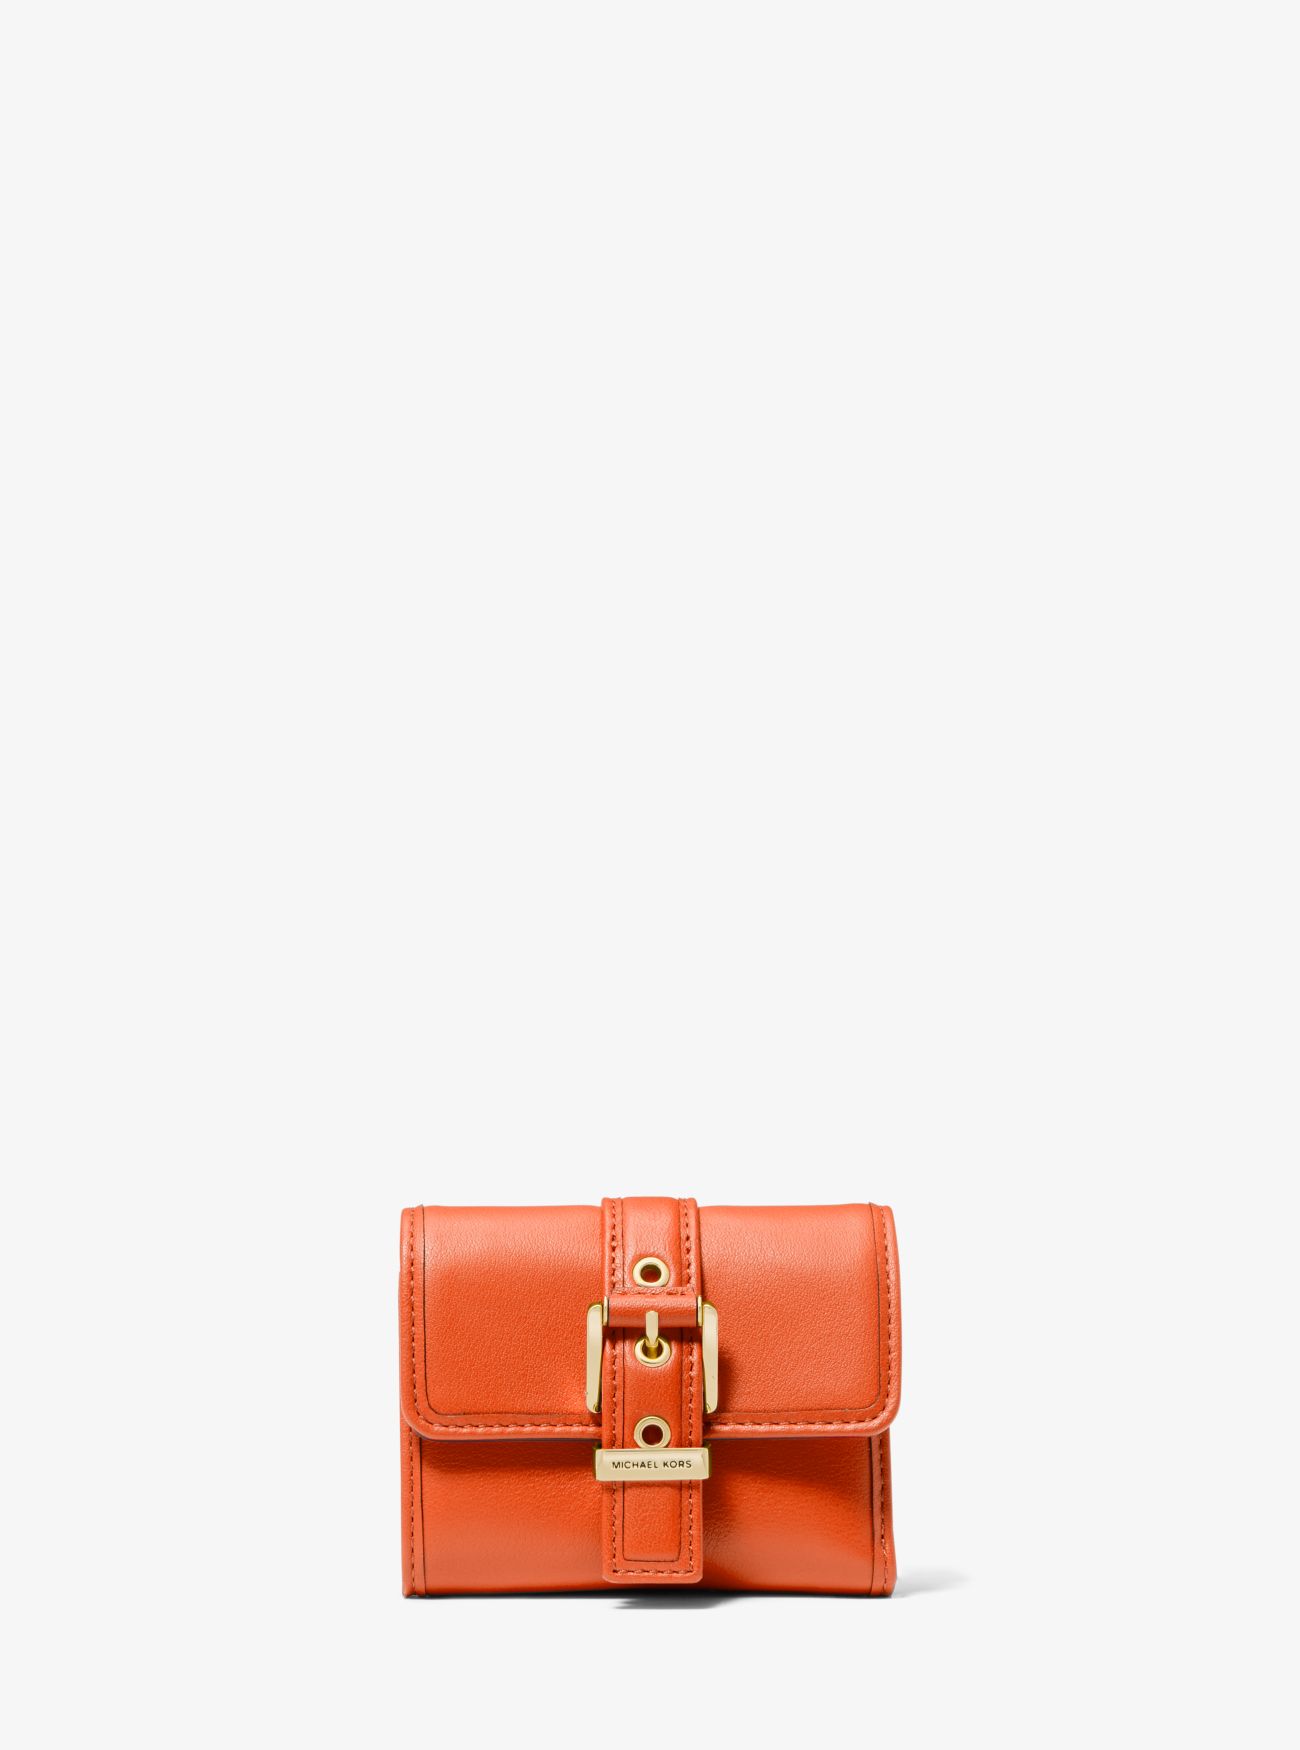 MK Colby Small Leather Tri-Fold Wallet - Orange - Michael Kors